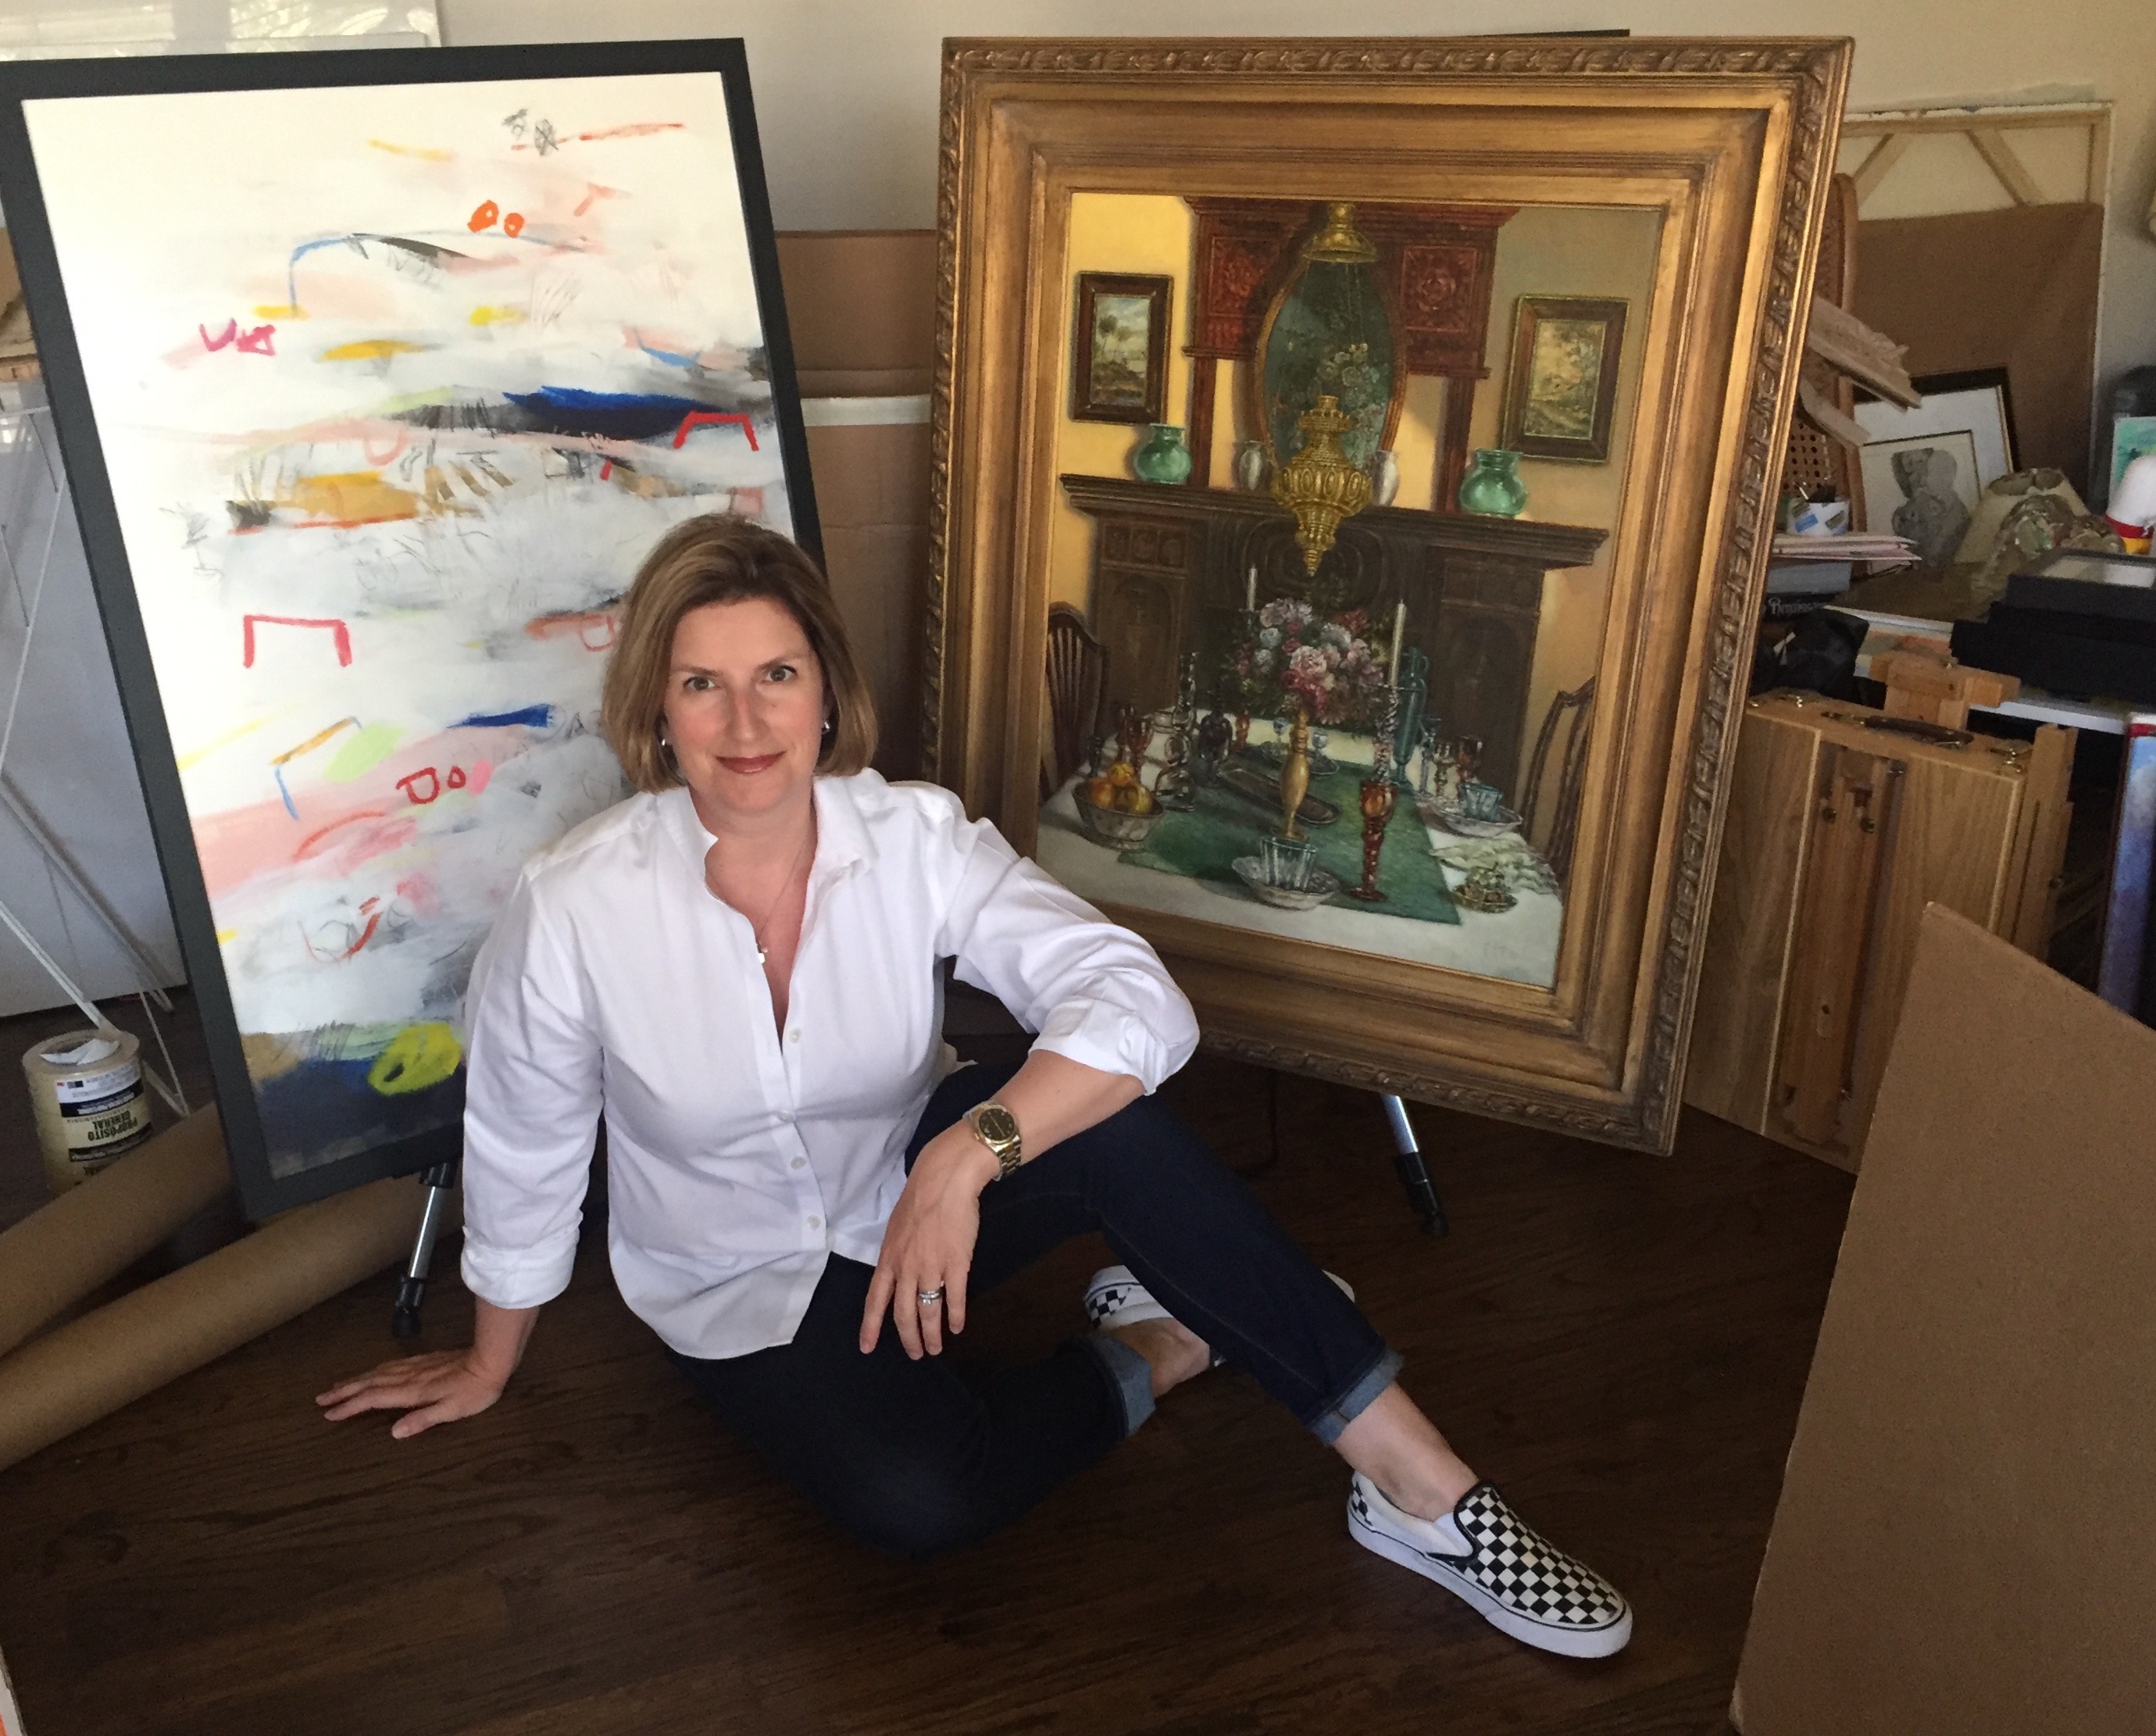 Ep. 16: How Ann Masciarotte turned her passion for art into a business